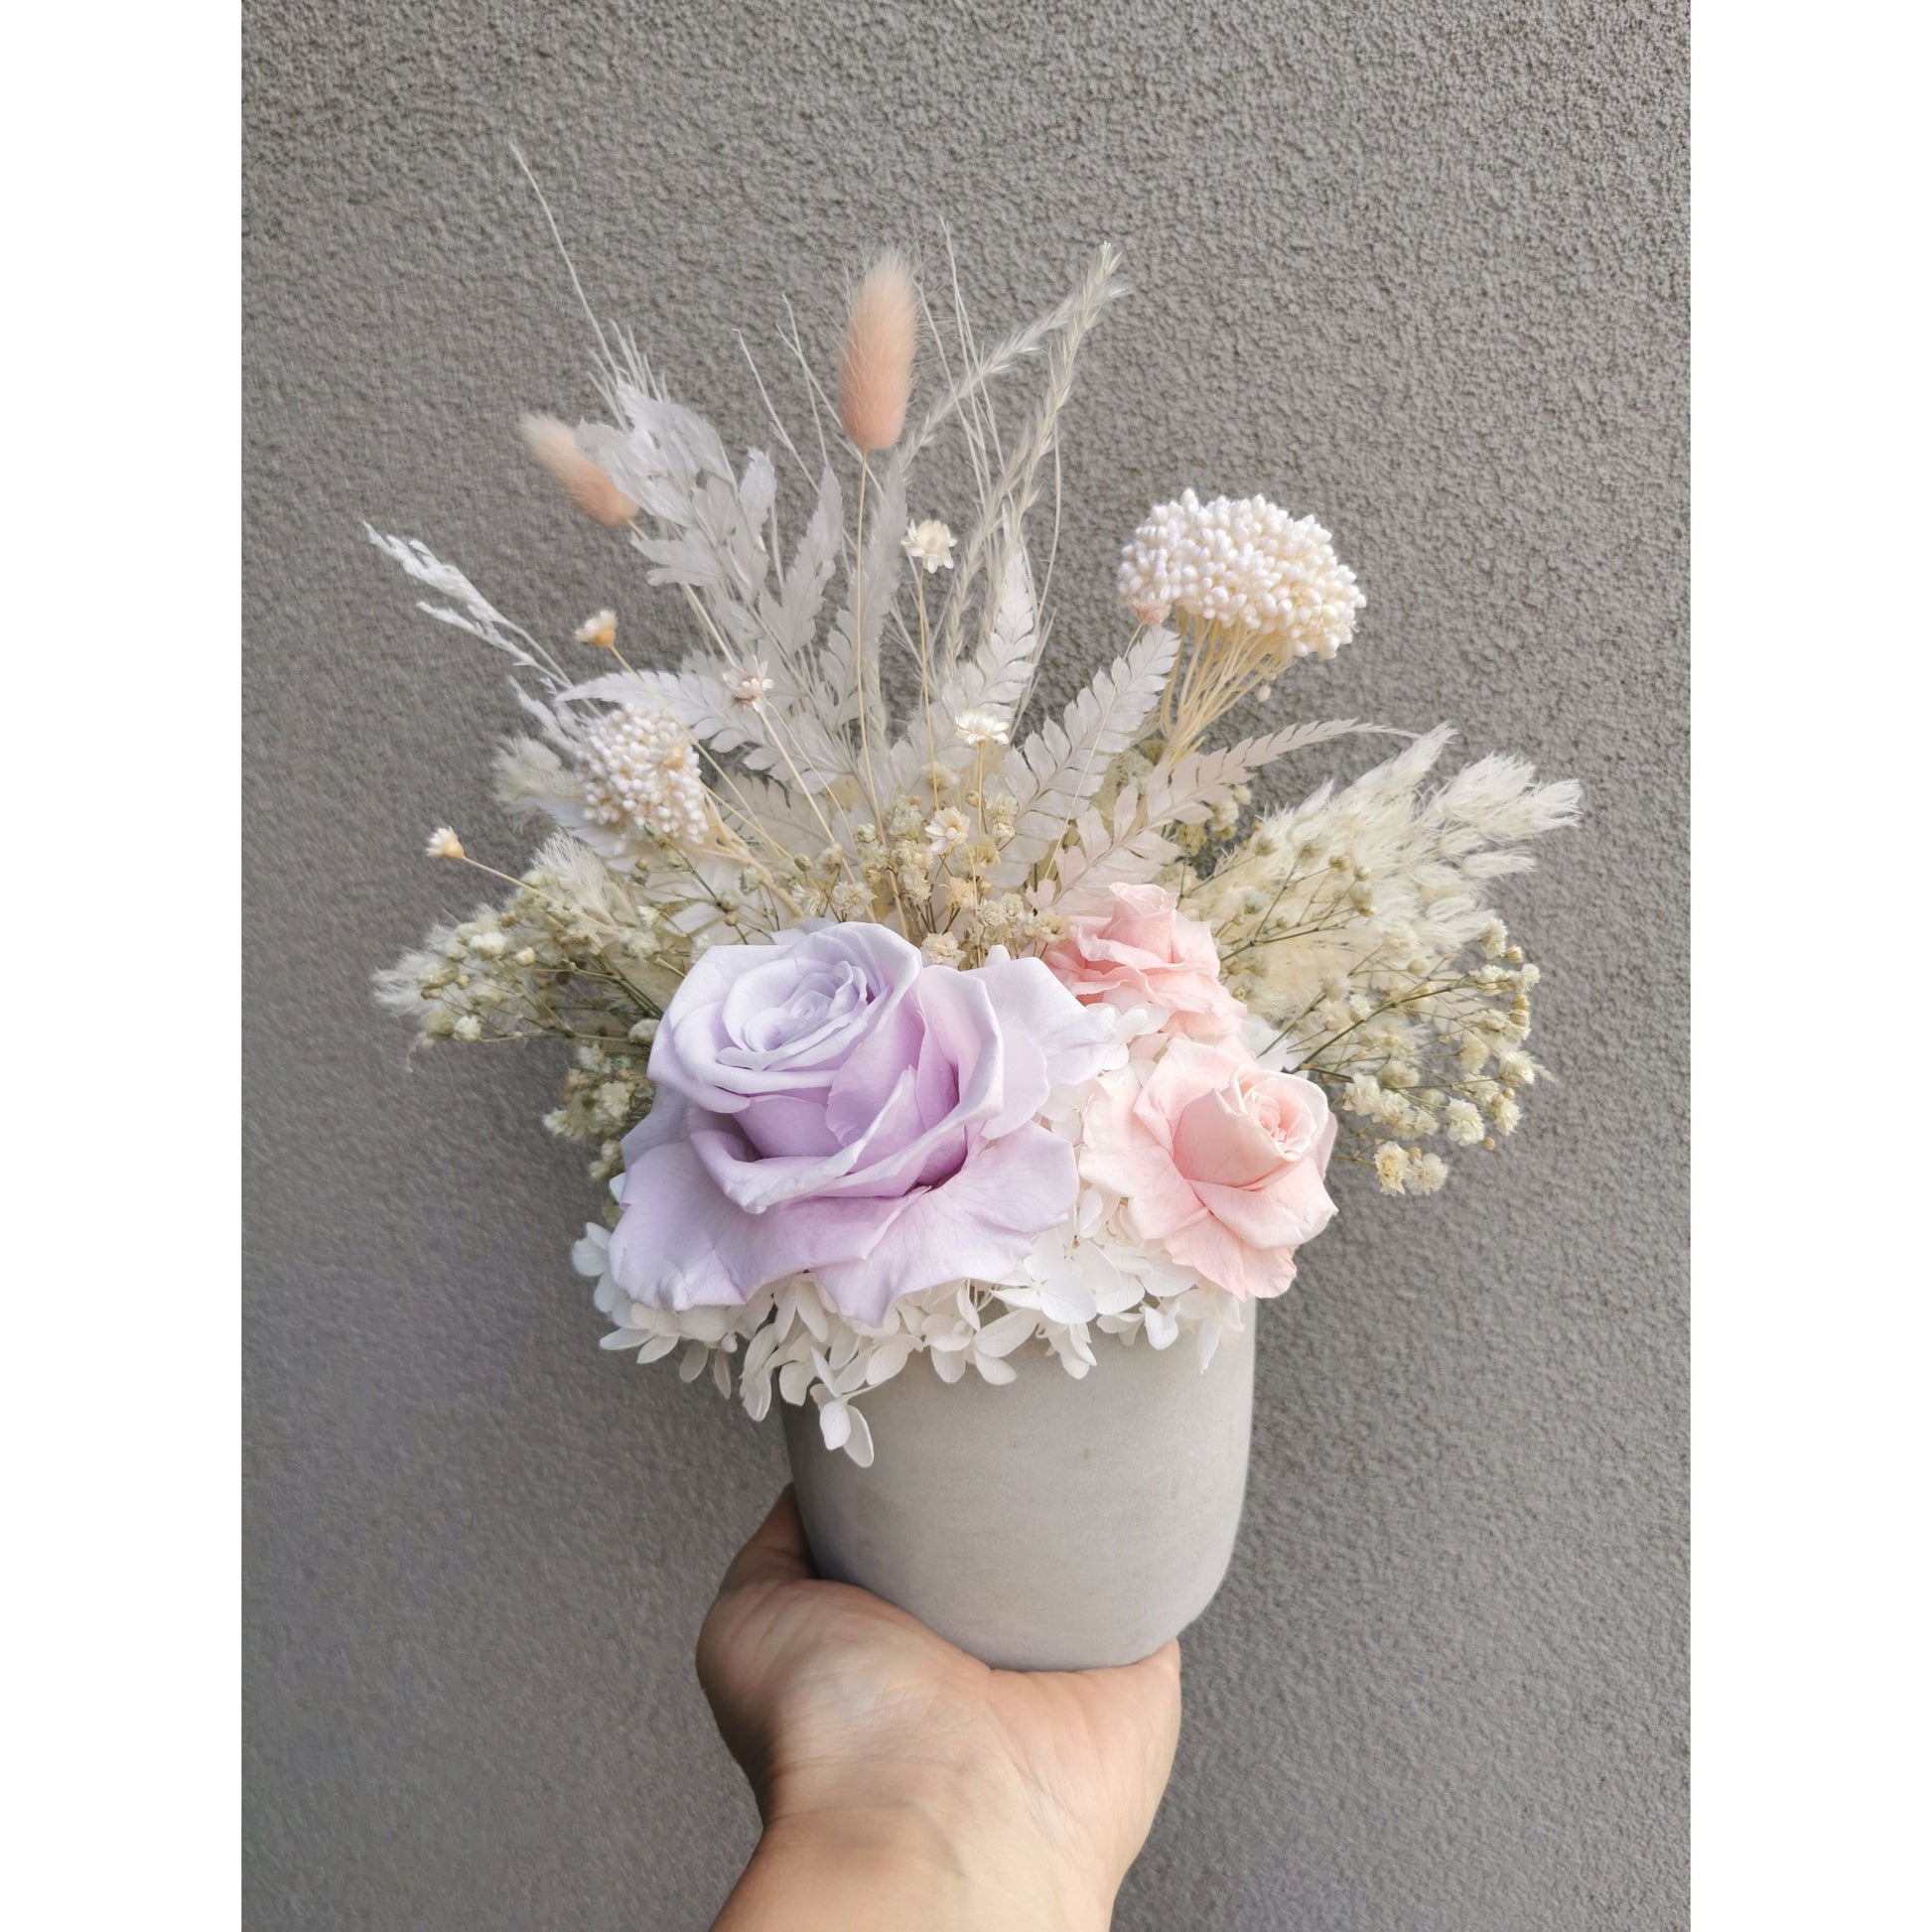 Dried & Preserved flower arrangement in pastel pink, purple & white flowers and set in to a light grey cement pot. Photo shows arrangement being held by hand against a blank wall